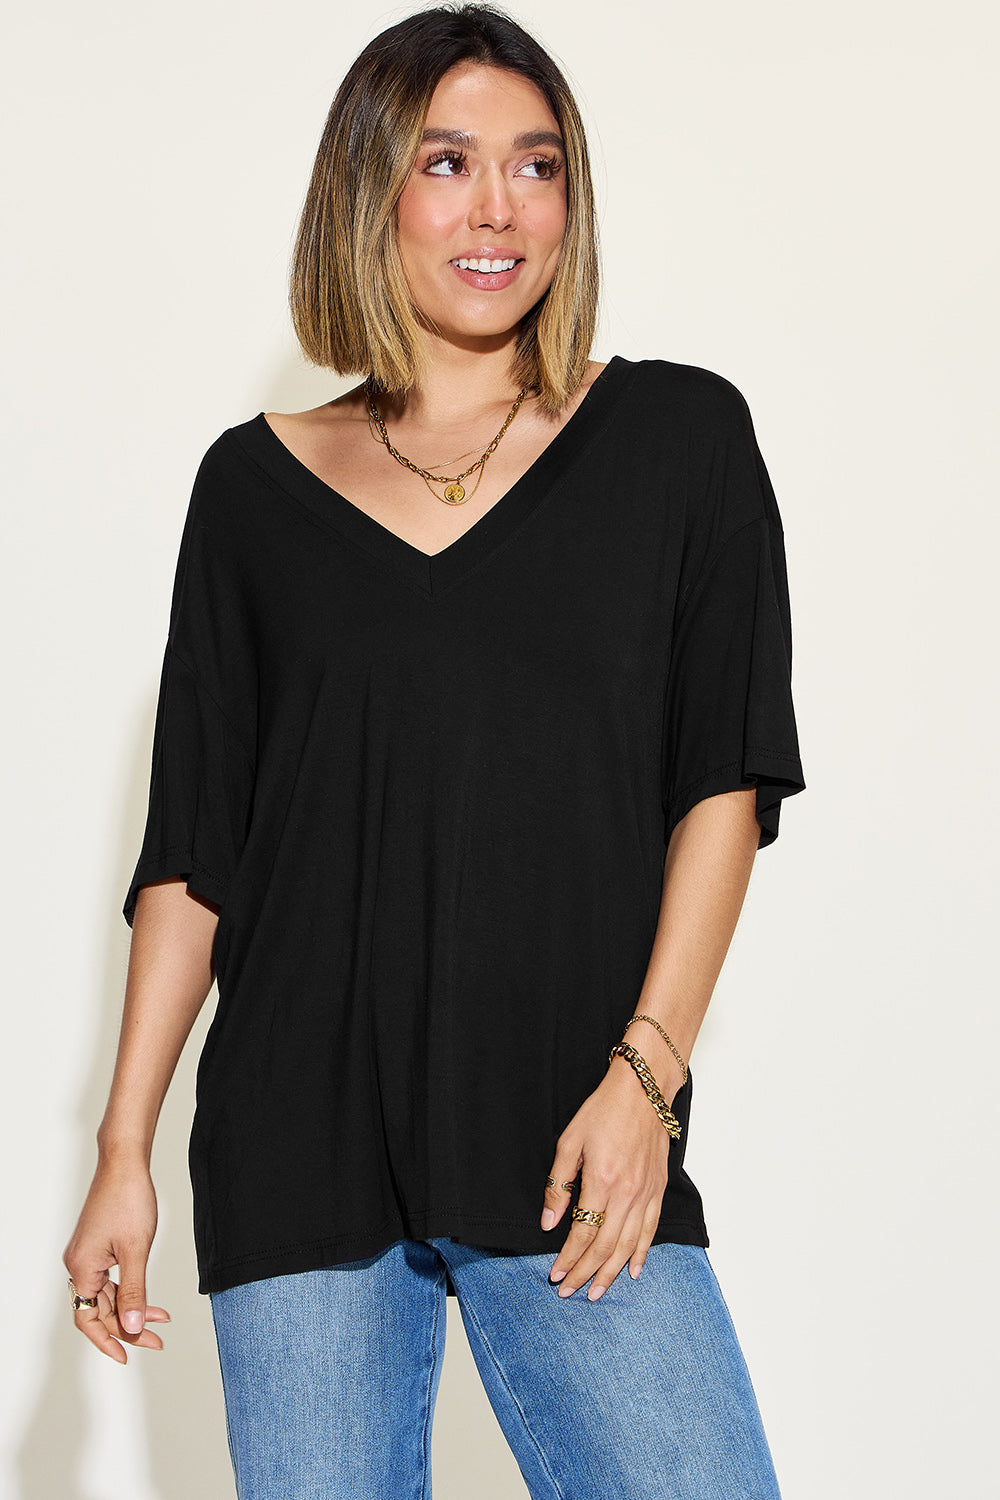 Basic Bae Bamboo V-Neck Drop Shoulder Full Size T-Shirt - A Comfort-Driven Style Statement